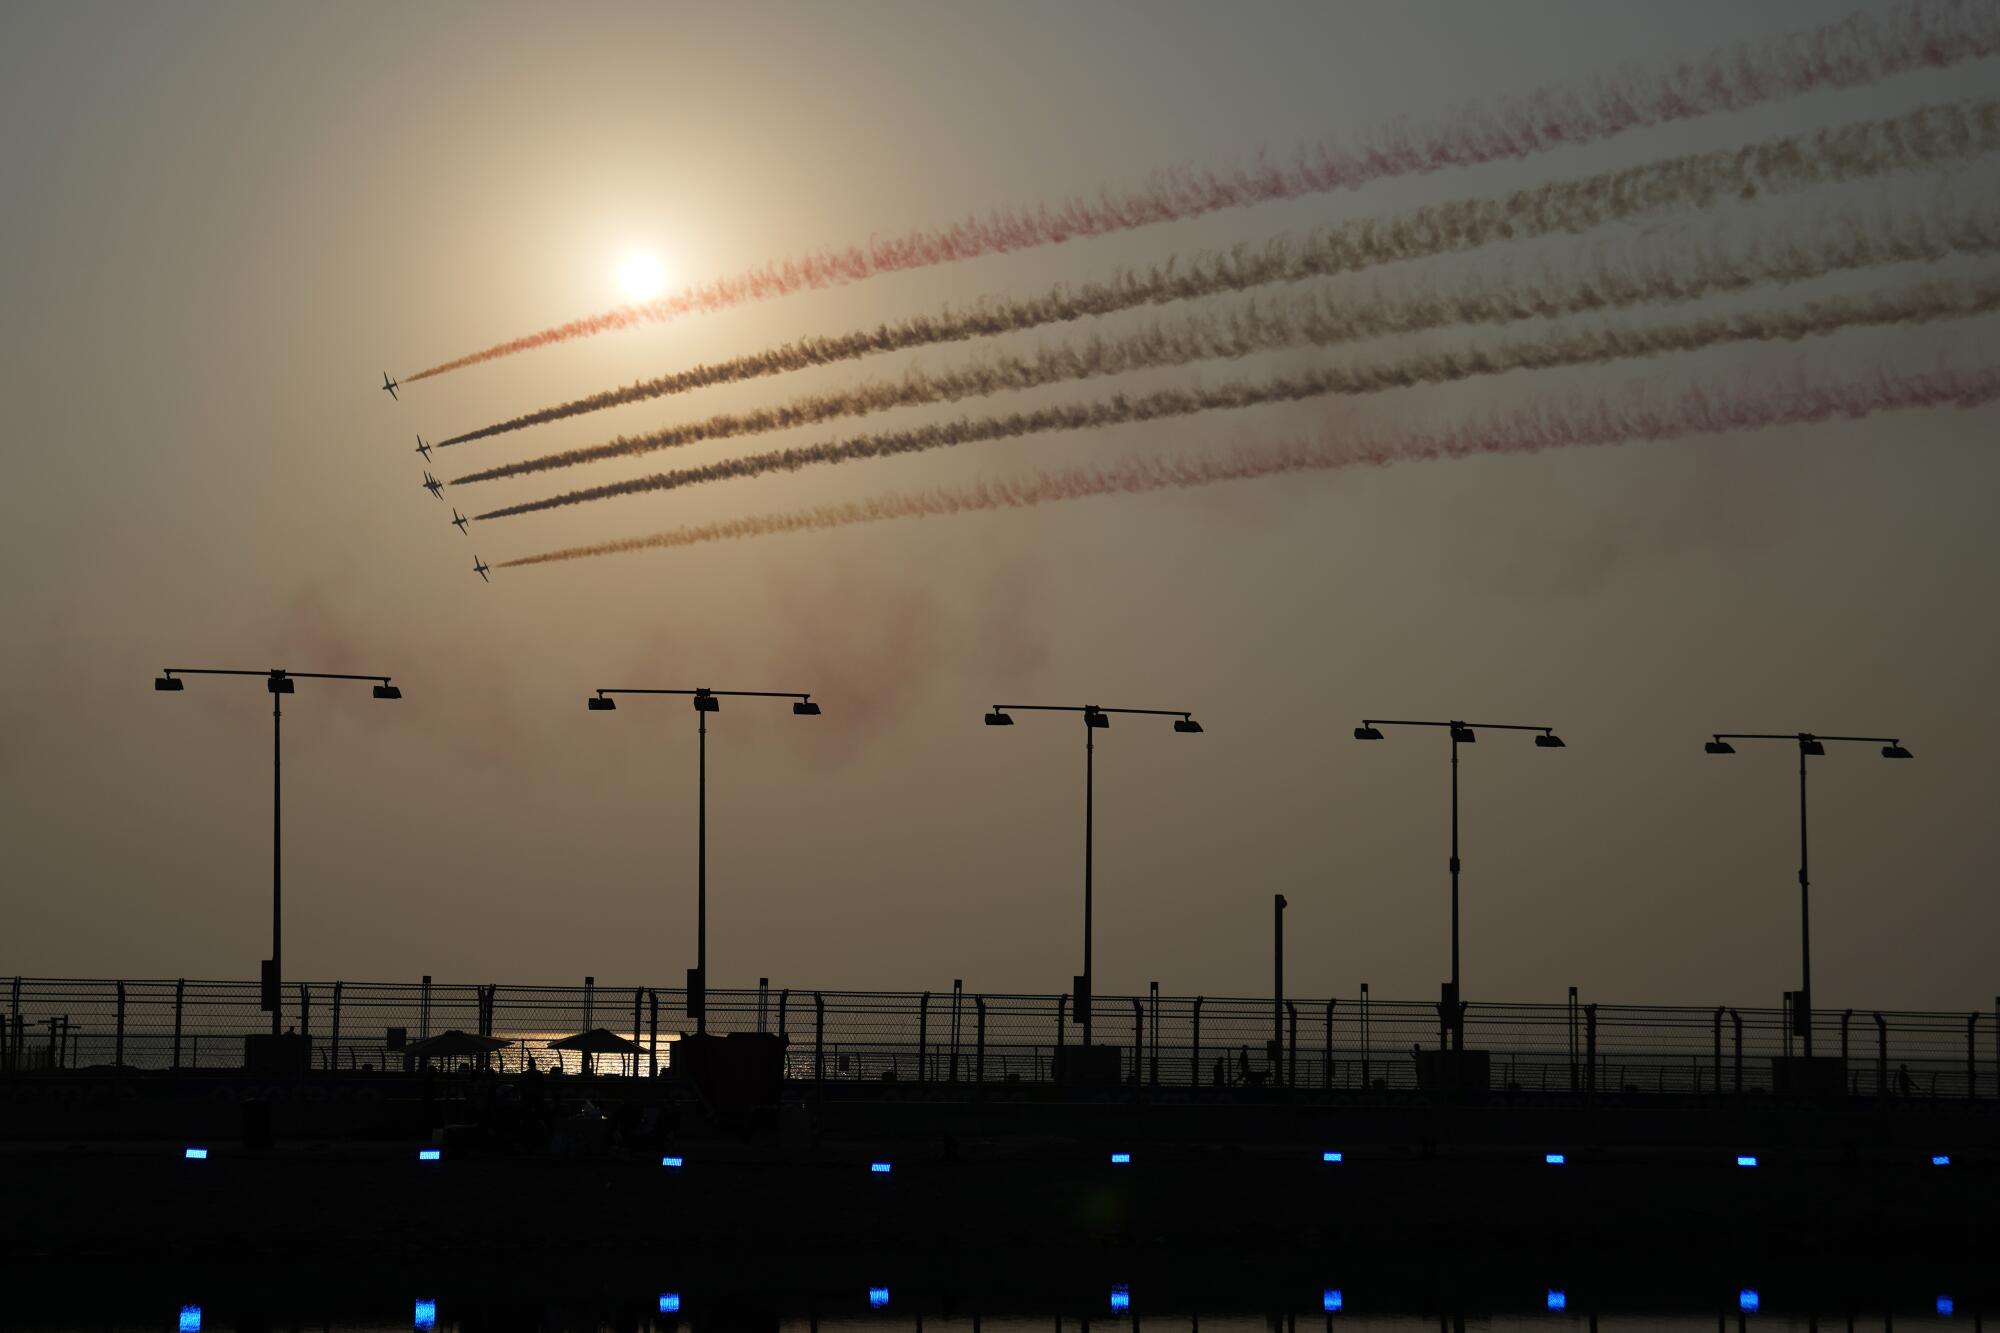 Jets trail streams of color over a racetrack in Saudi Arabia against the hazy sun.